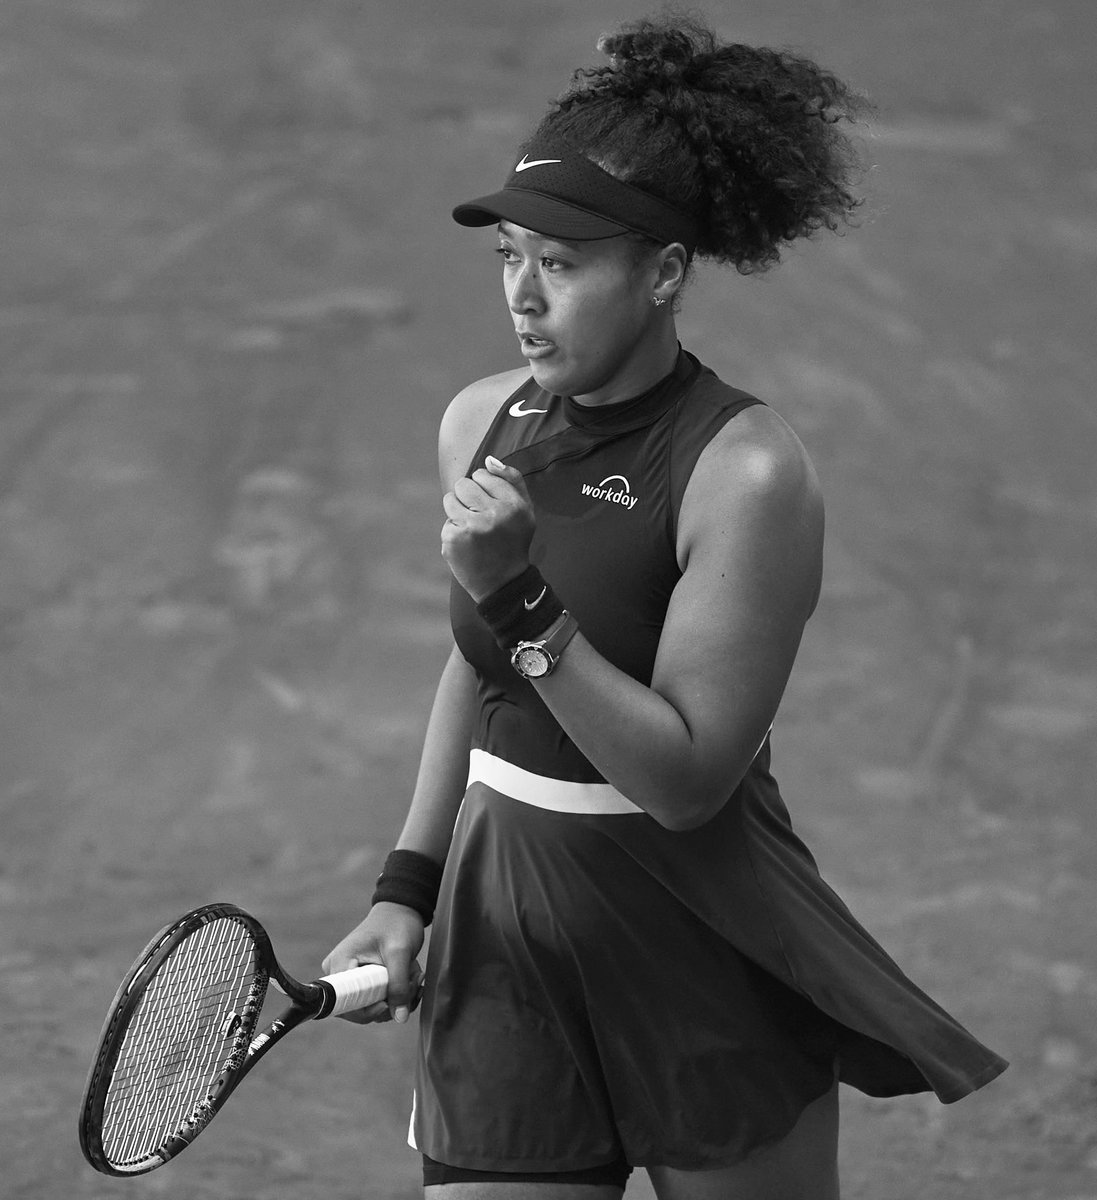 #MMOPEN | @naomiosaka is through to the second round after an impressive 6-4, 6-1 victory over lucky loser Greet Minnen. Osaka, who faced just one break point in the entire match, takes on No 15 seed Liudmila Samsonova next. 📸 | Mateo Villalba [Getty]